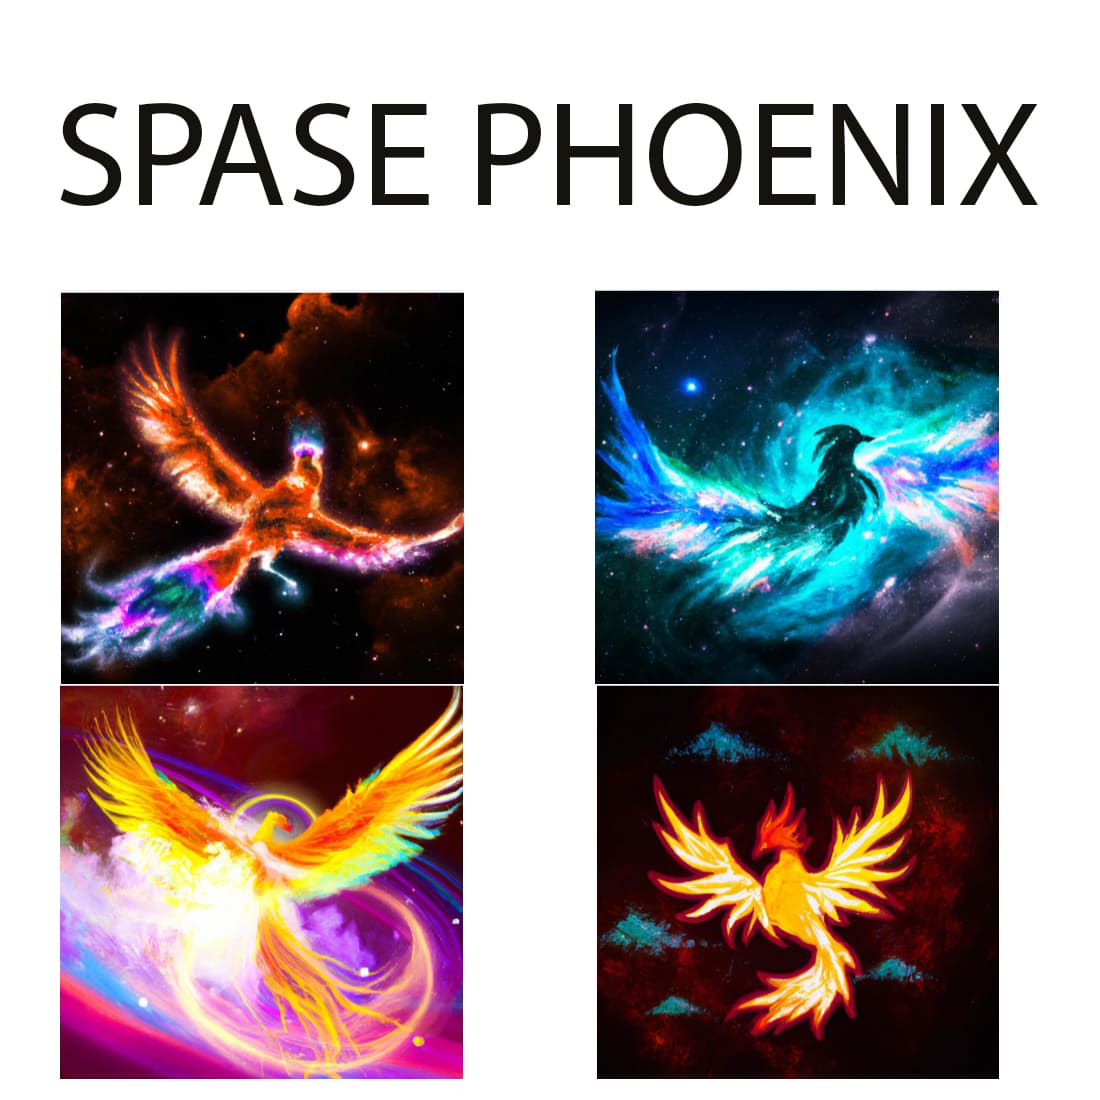 Phoenix in Space cover image.